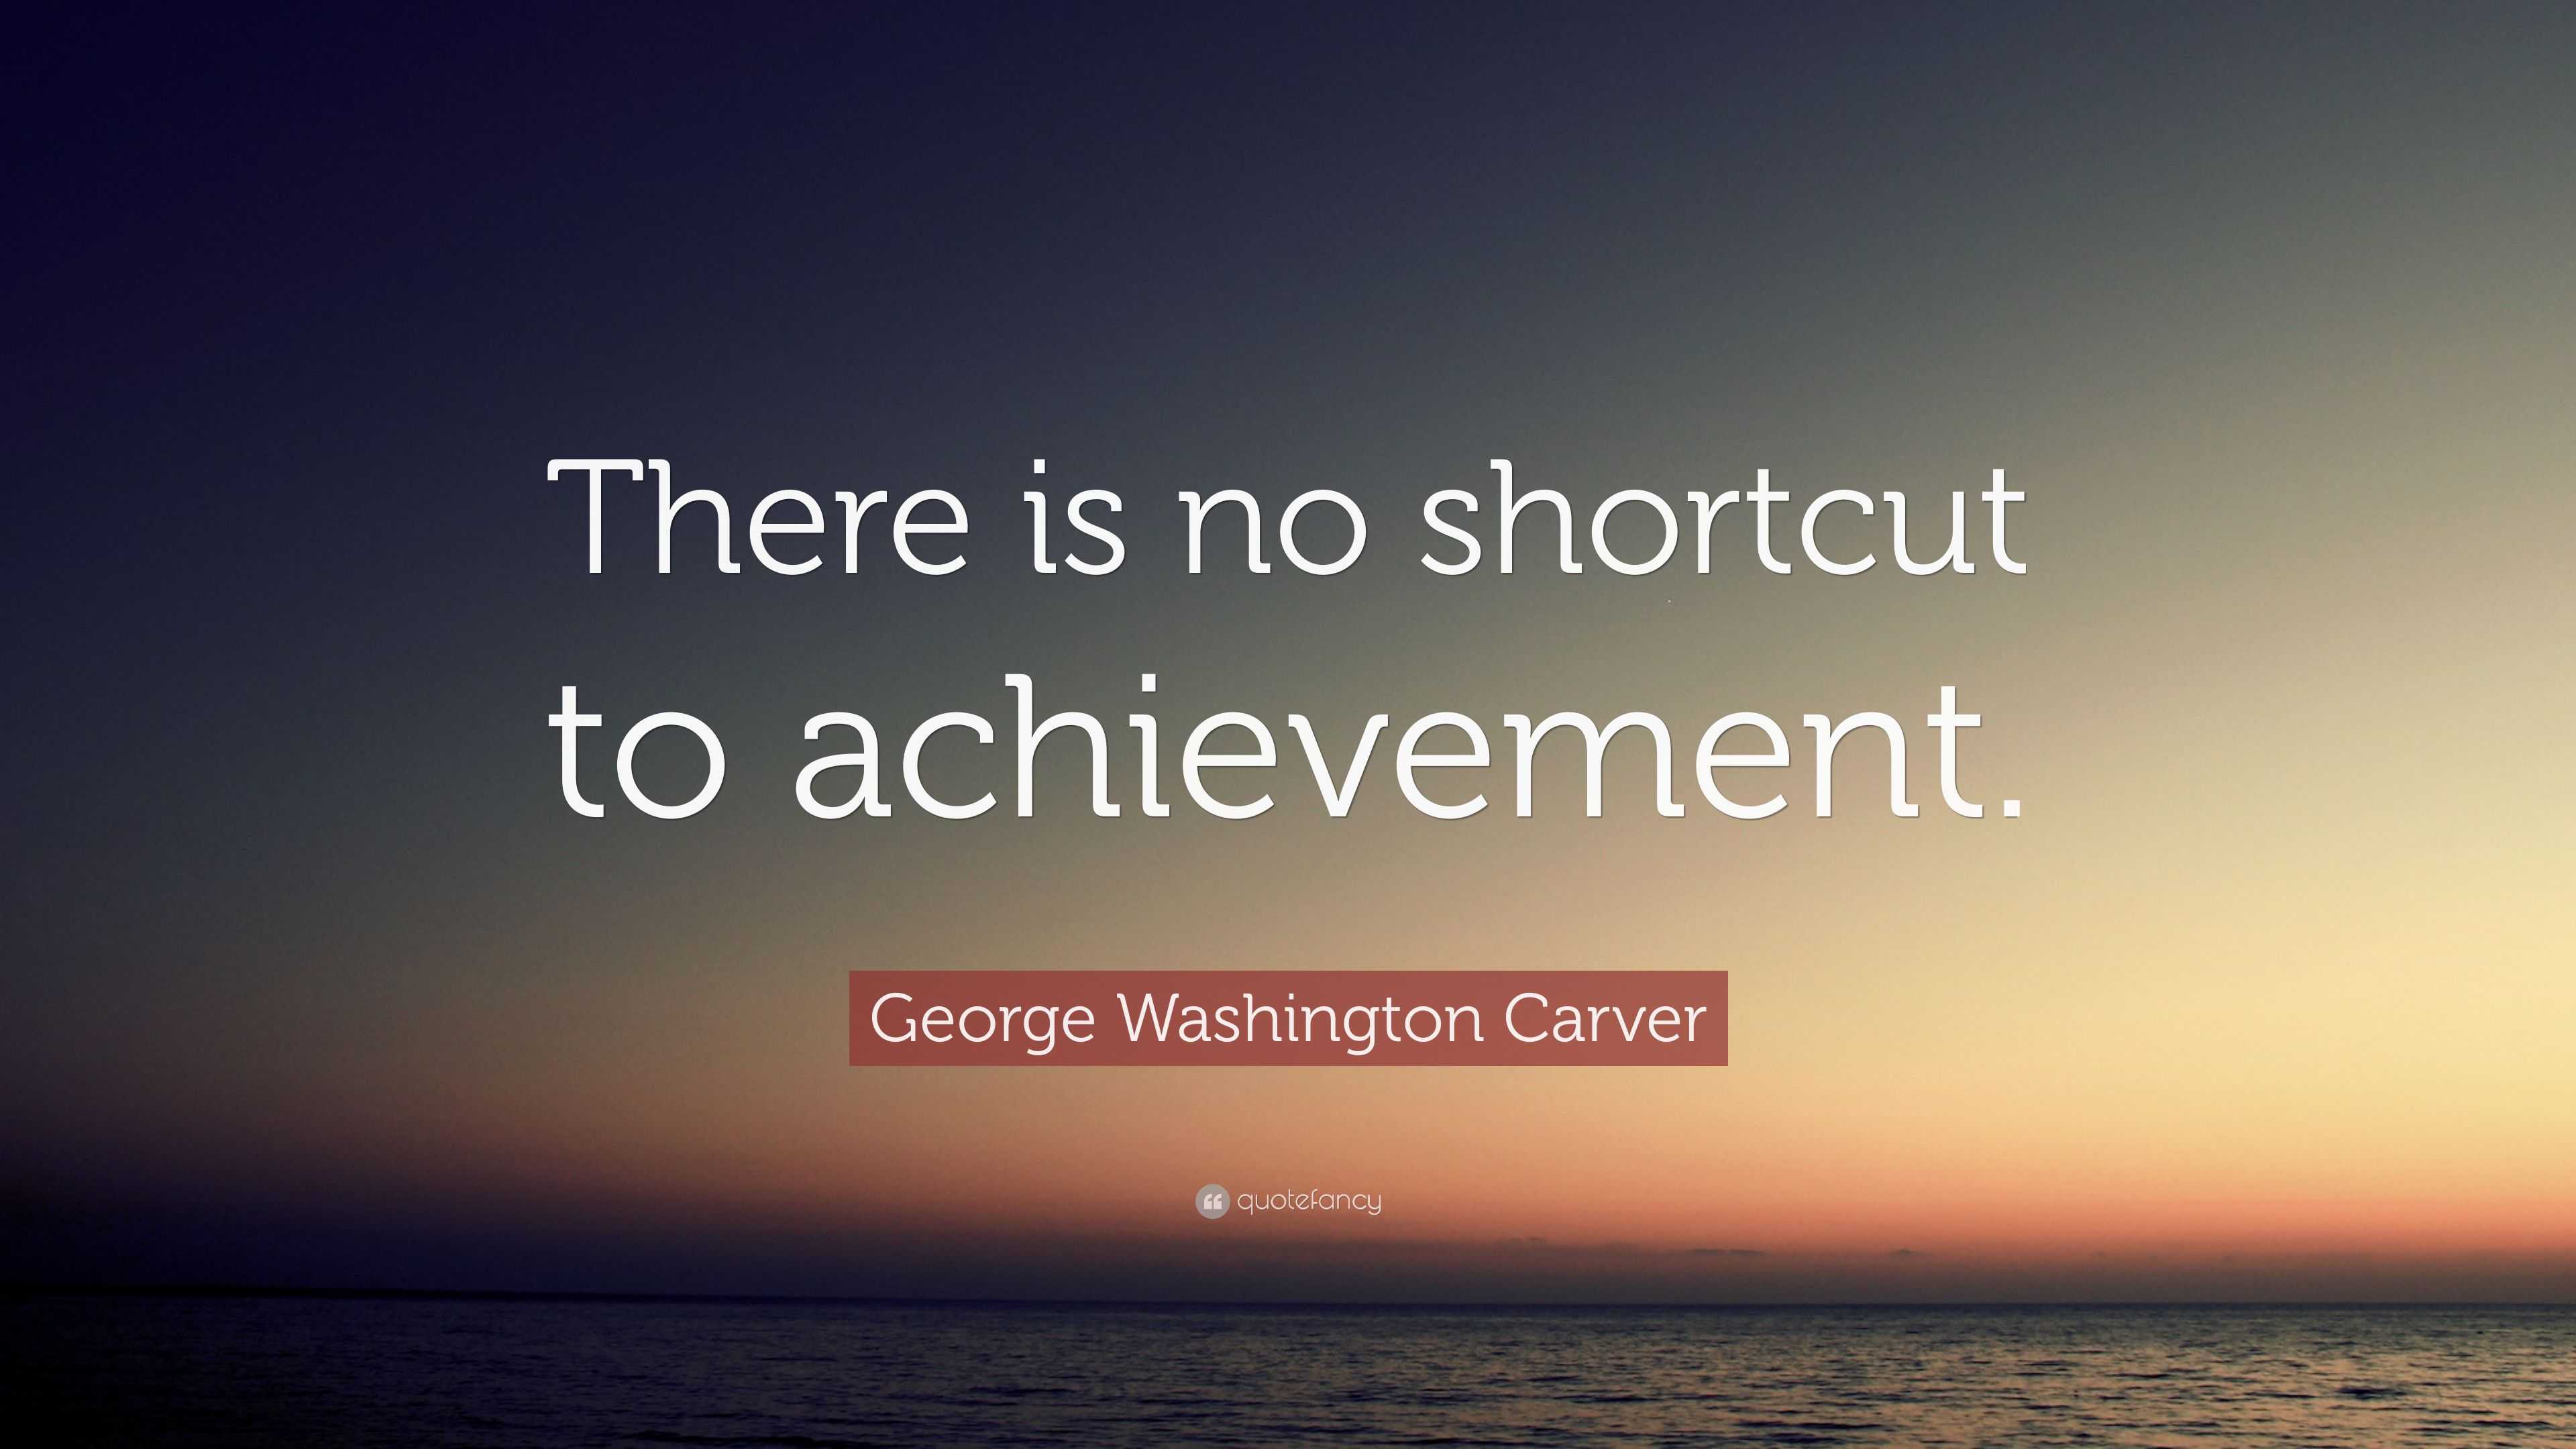 George Washington Carver Quote: “There is no shortcut to achievement